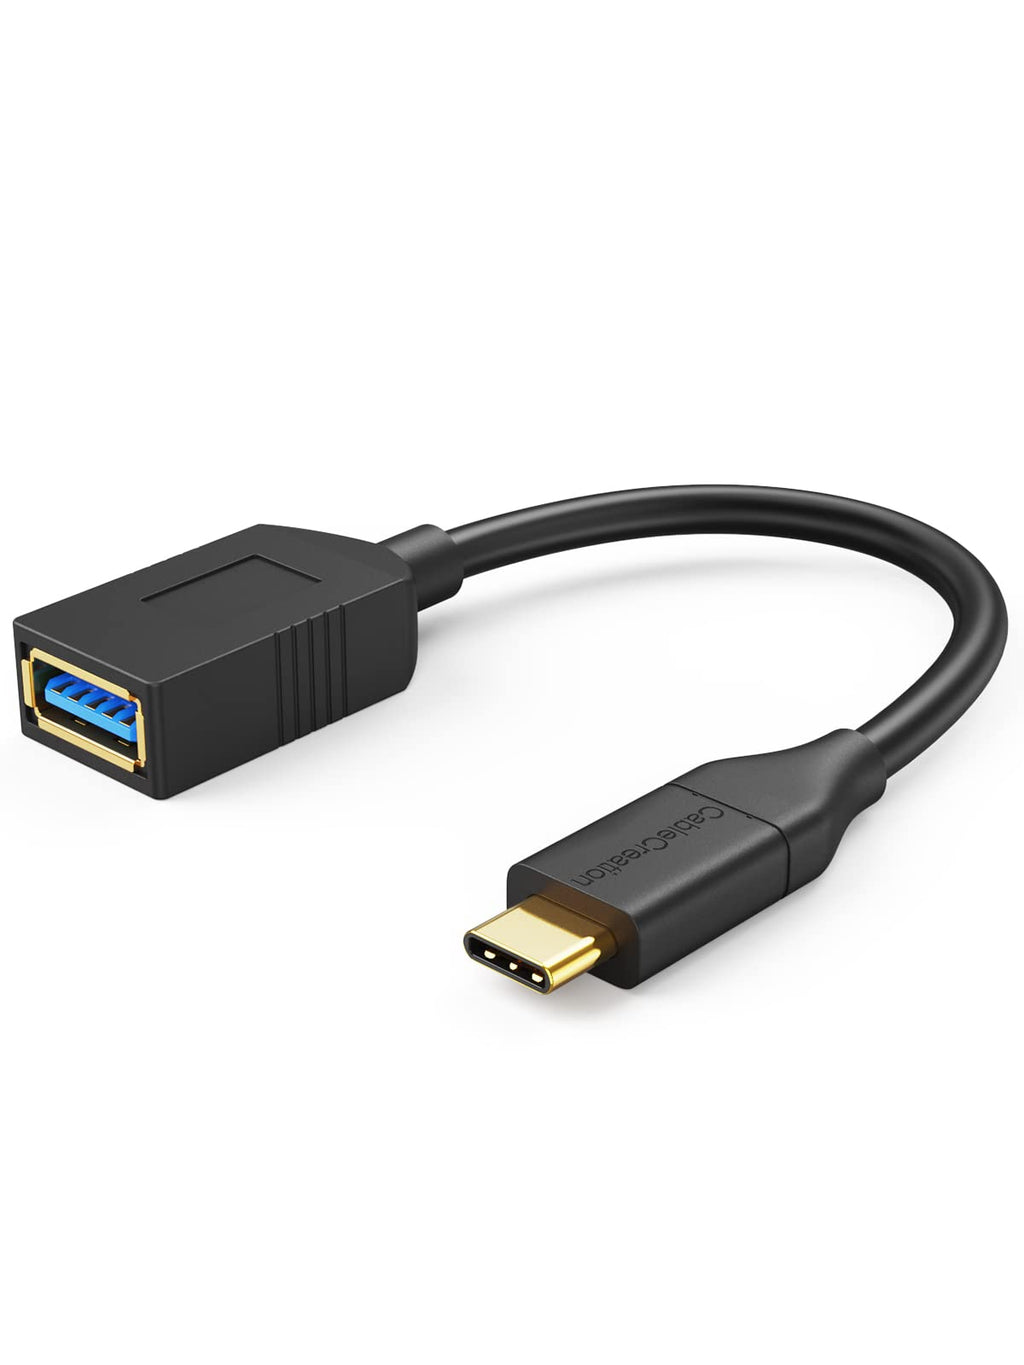  [AUSTRALIA] - USB-C to USB 3.0 Female Adapter, 0.5 ft CableCreation (Gen1) USB3.1 Type C to Type A Adapter OTG Cord, Compatible MacBook Pro, Galaxy S8, S9 etc,Black Black